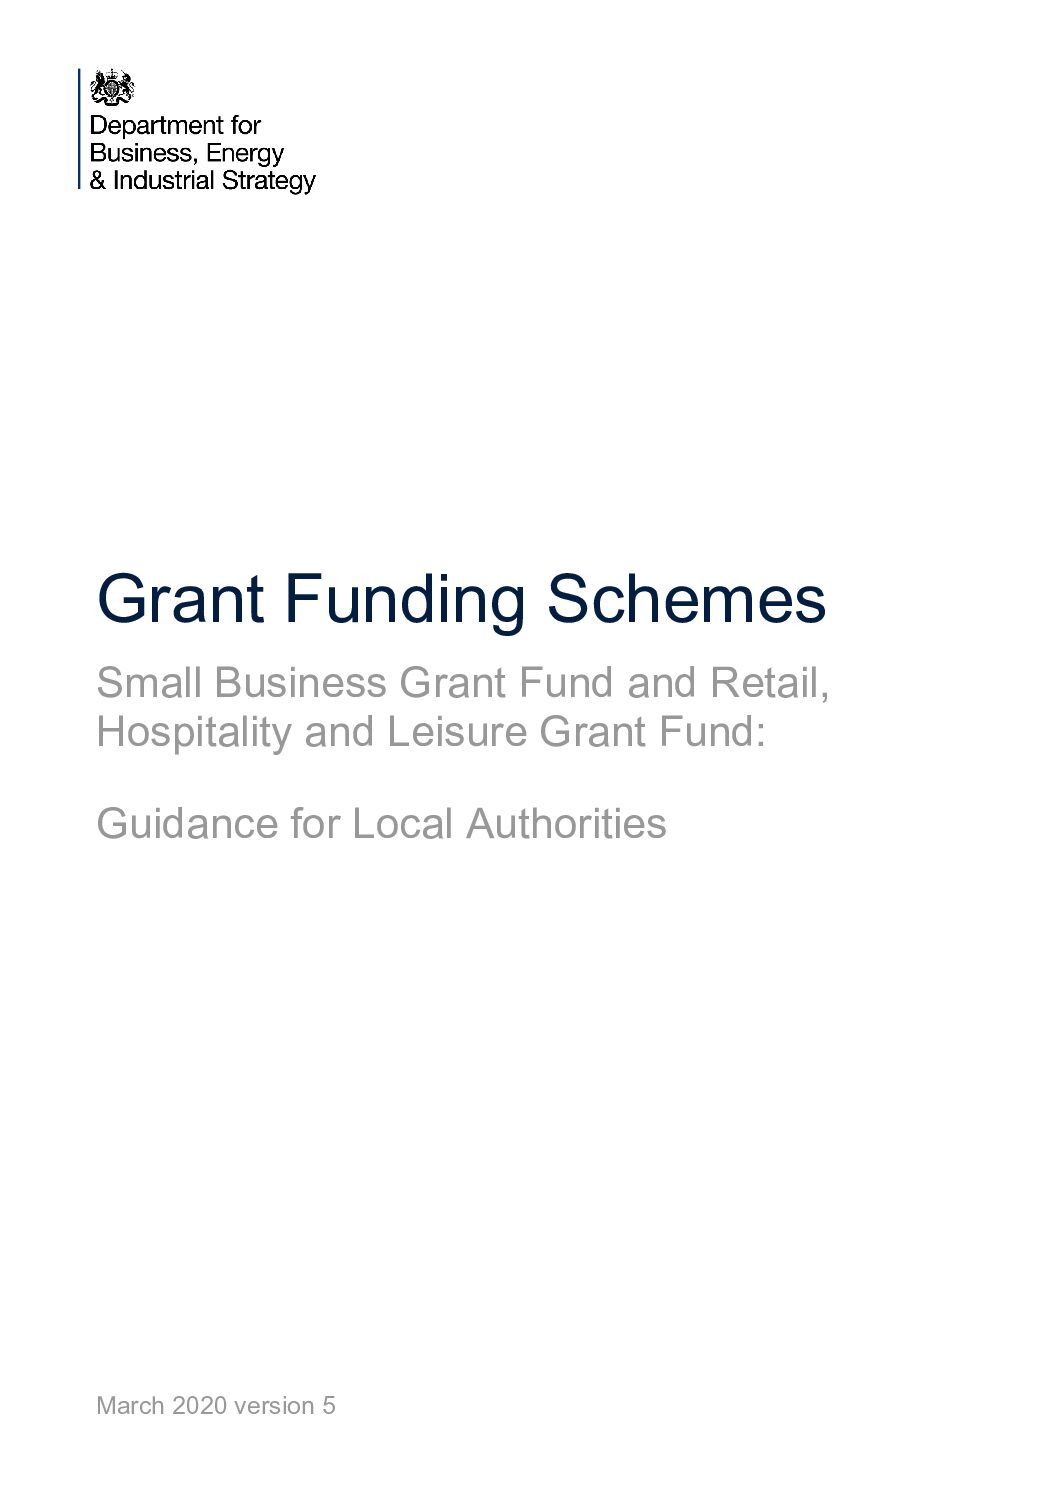 business_support_grants-local_authorities_guidance